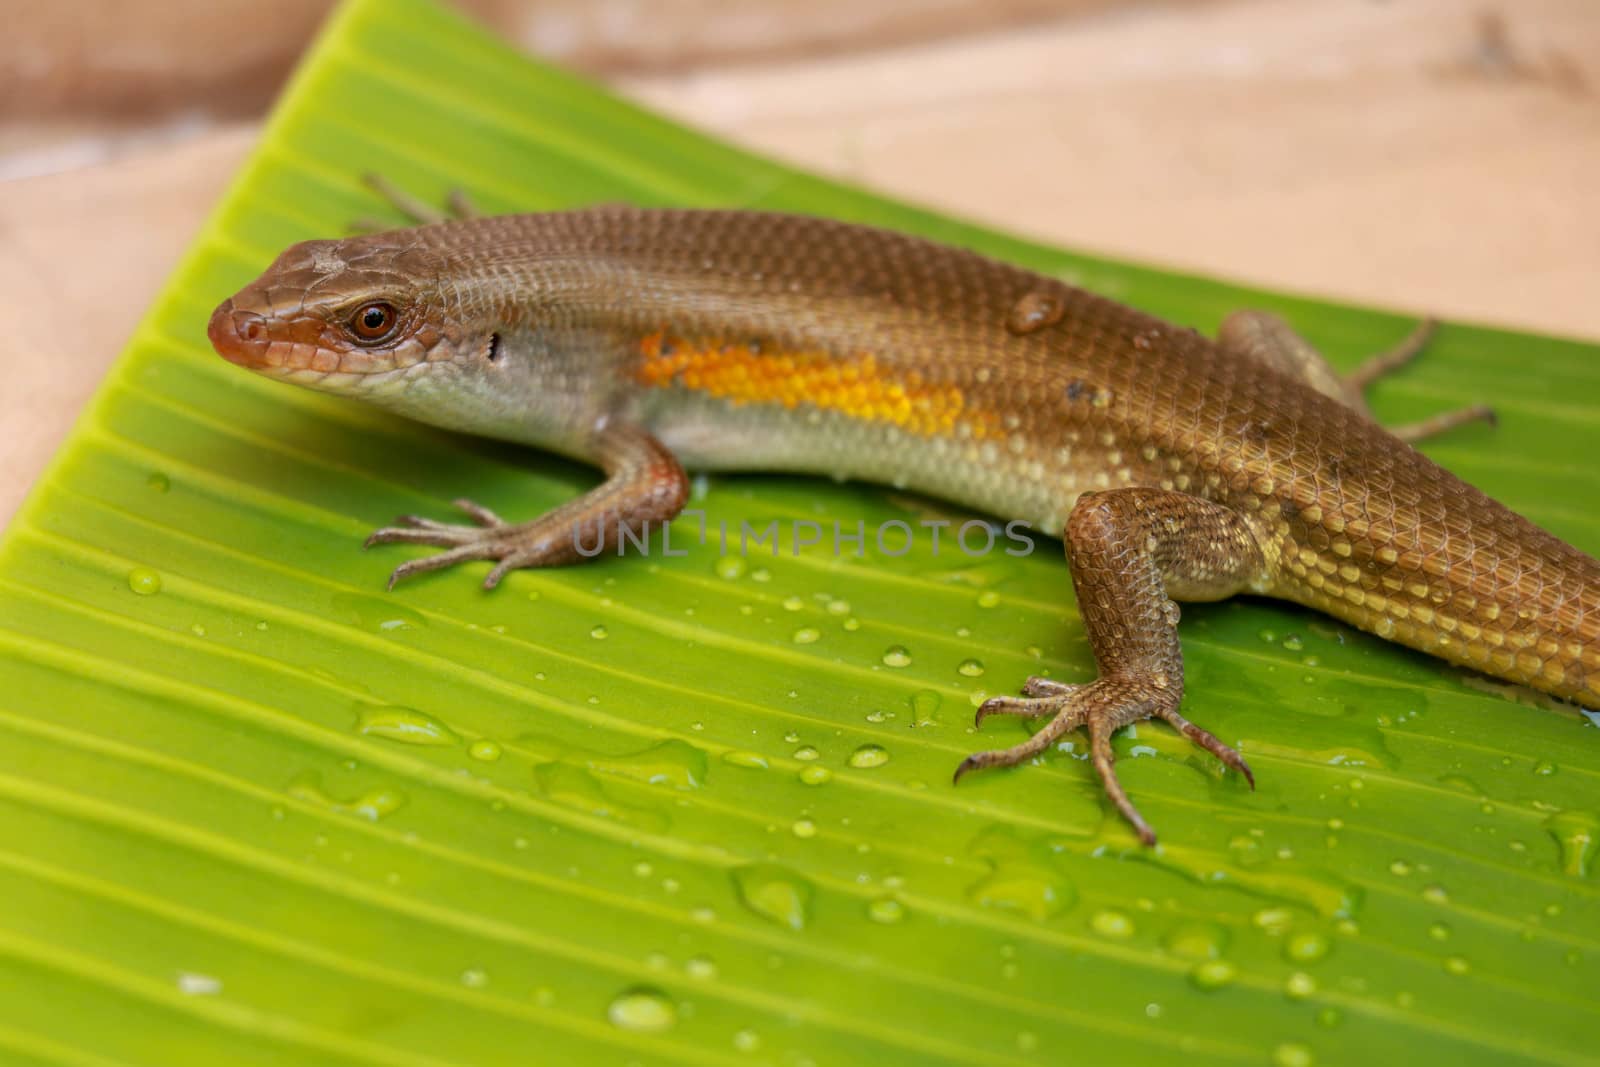 Balinese Skink. Lizard Eutropis multifasciata on a wet green leaf between water camps. Most species of skinks have long, tapering tails that they can shed if a predator grabs the tail by Sanatana2008